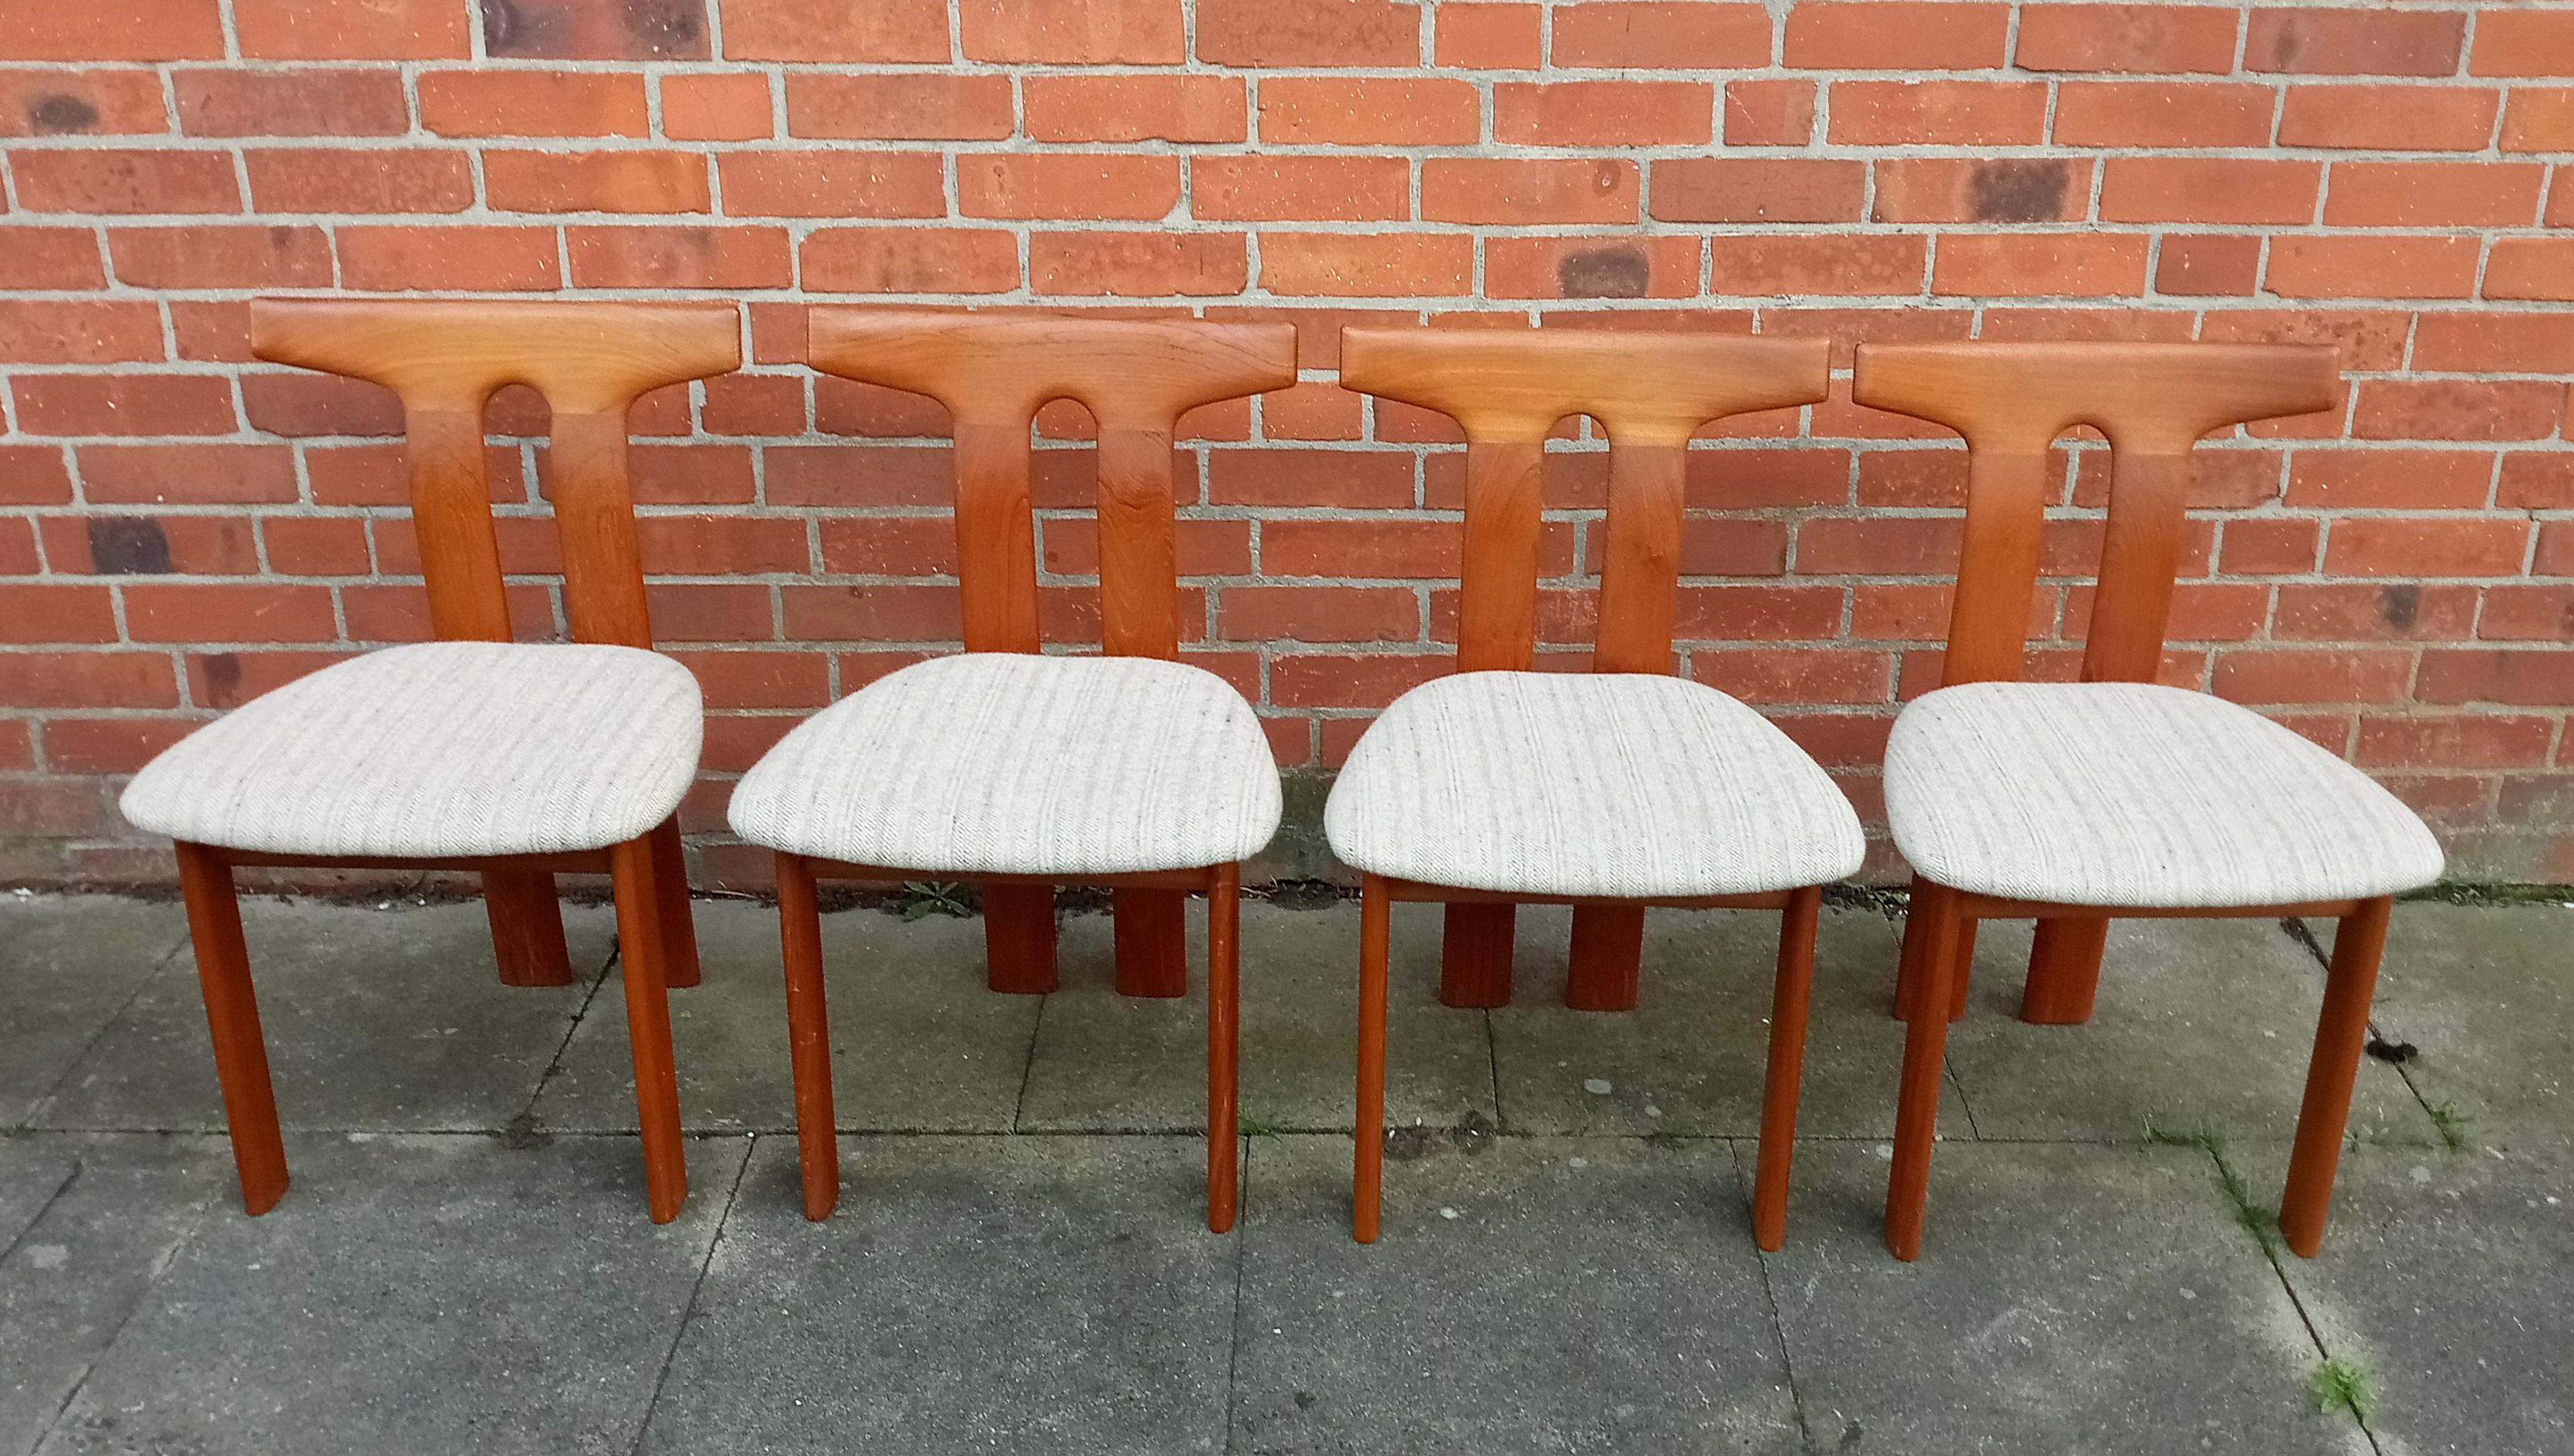 decorative set of four danish dining chairs in good used condition
The seats have the original wool fabrics. The name of the wool company is signed on the bottom of the seats.